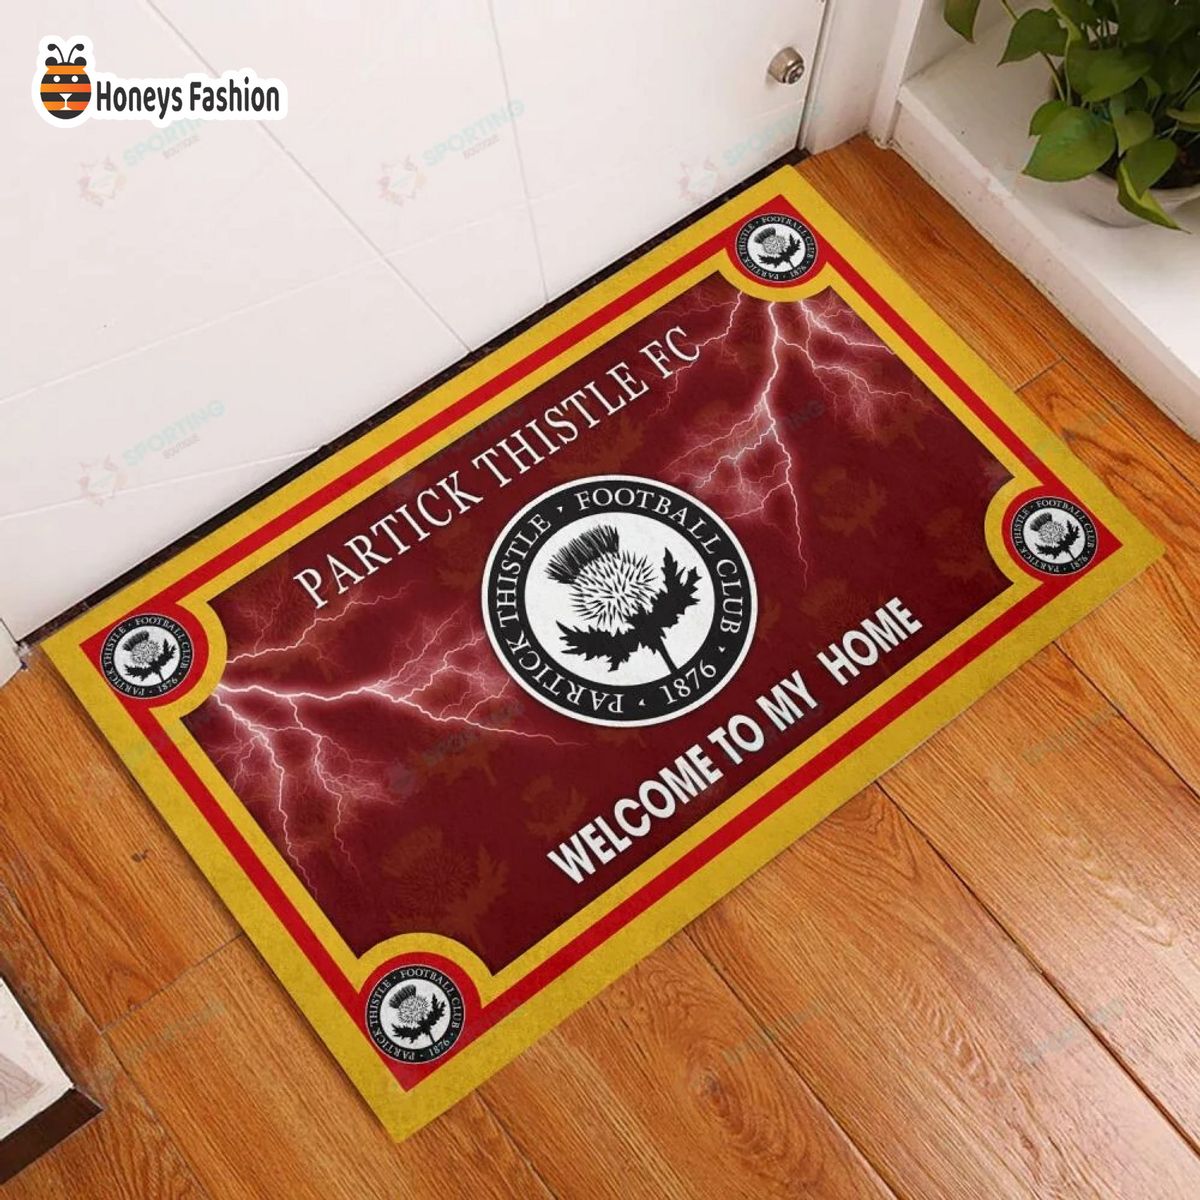 Partick Thistle F.C. welcome to my home doormat